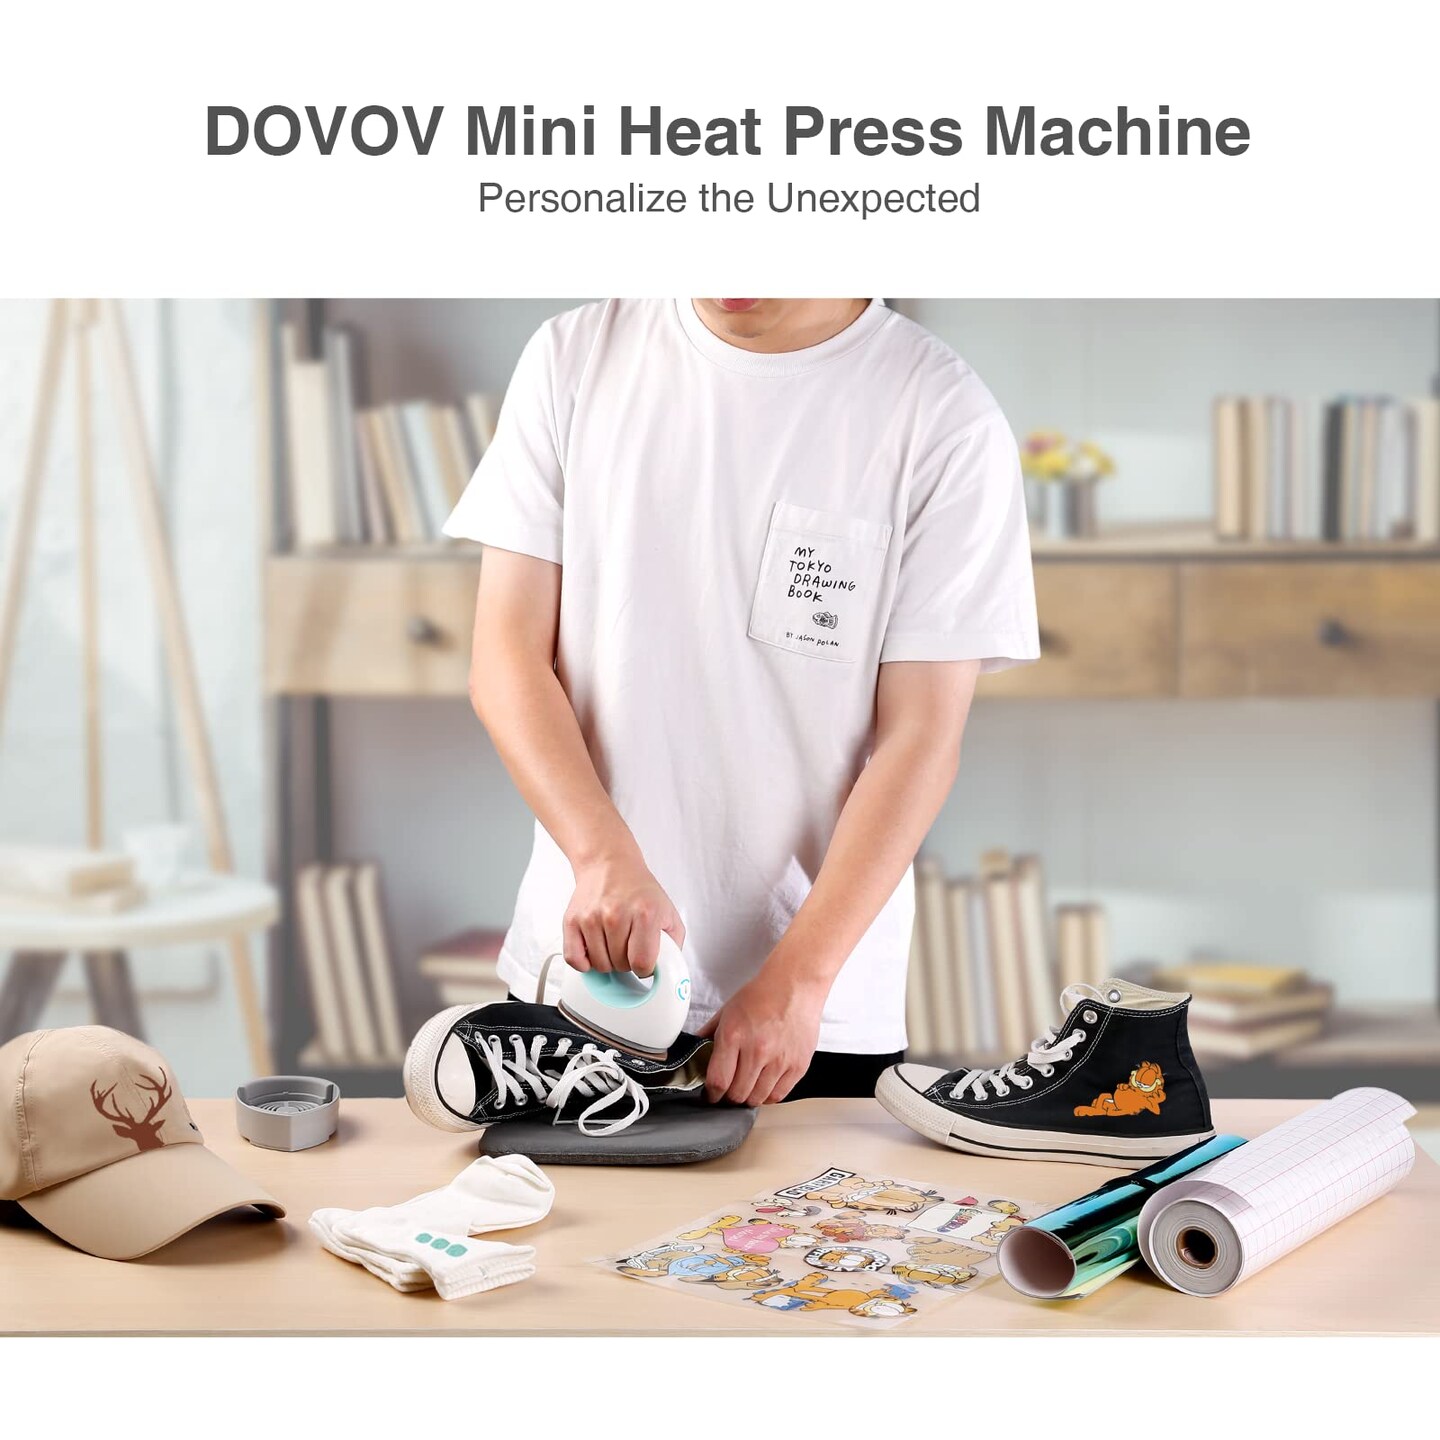 Dovov Mini Heat Press, Small Heat Press Machine for T Shirt, Shoes, Hats, Iron Press for Small HTV Vinyl Projects (Green)